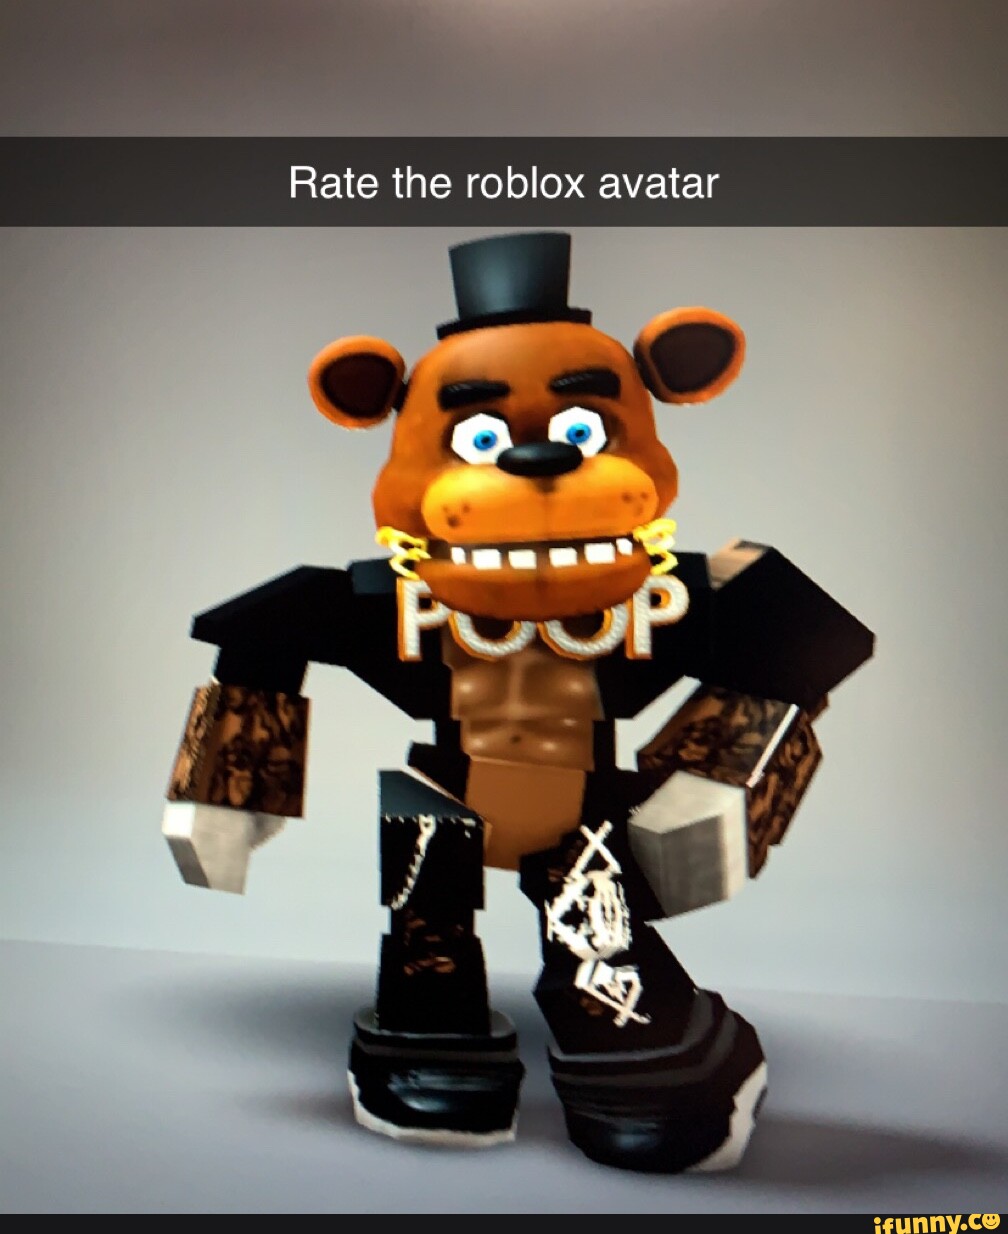 Copy this to get a roblox avatar. tie MAKER ER - iFunny Brazil